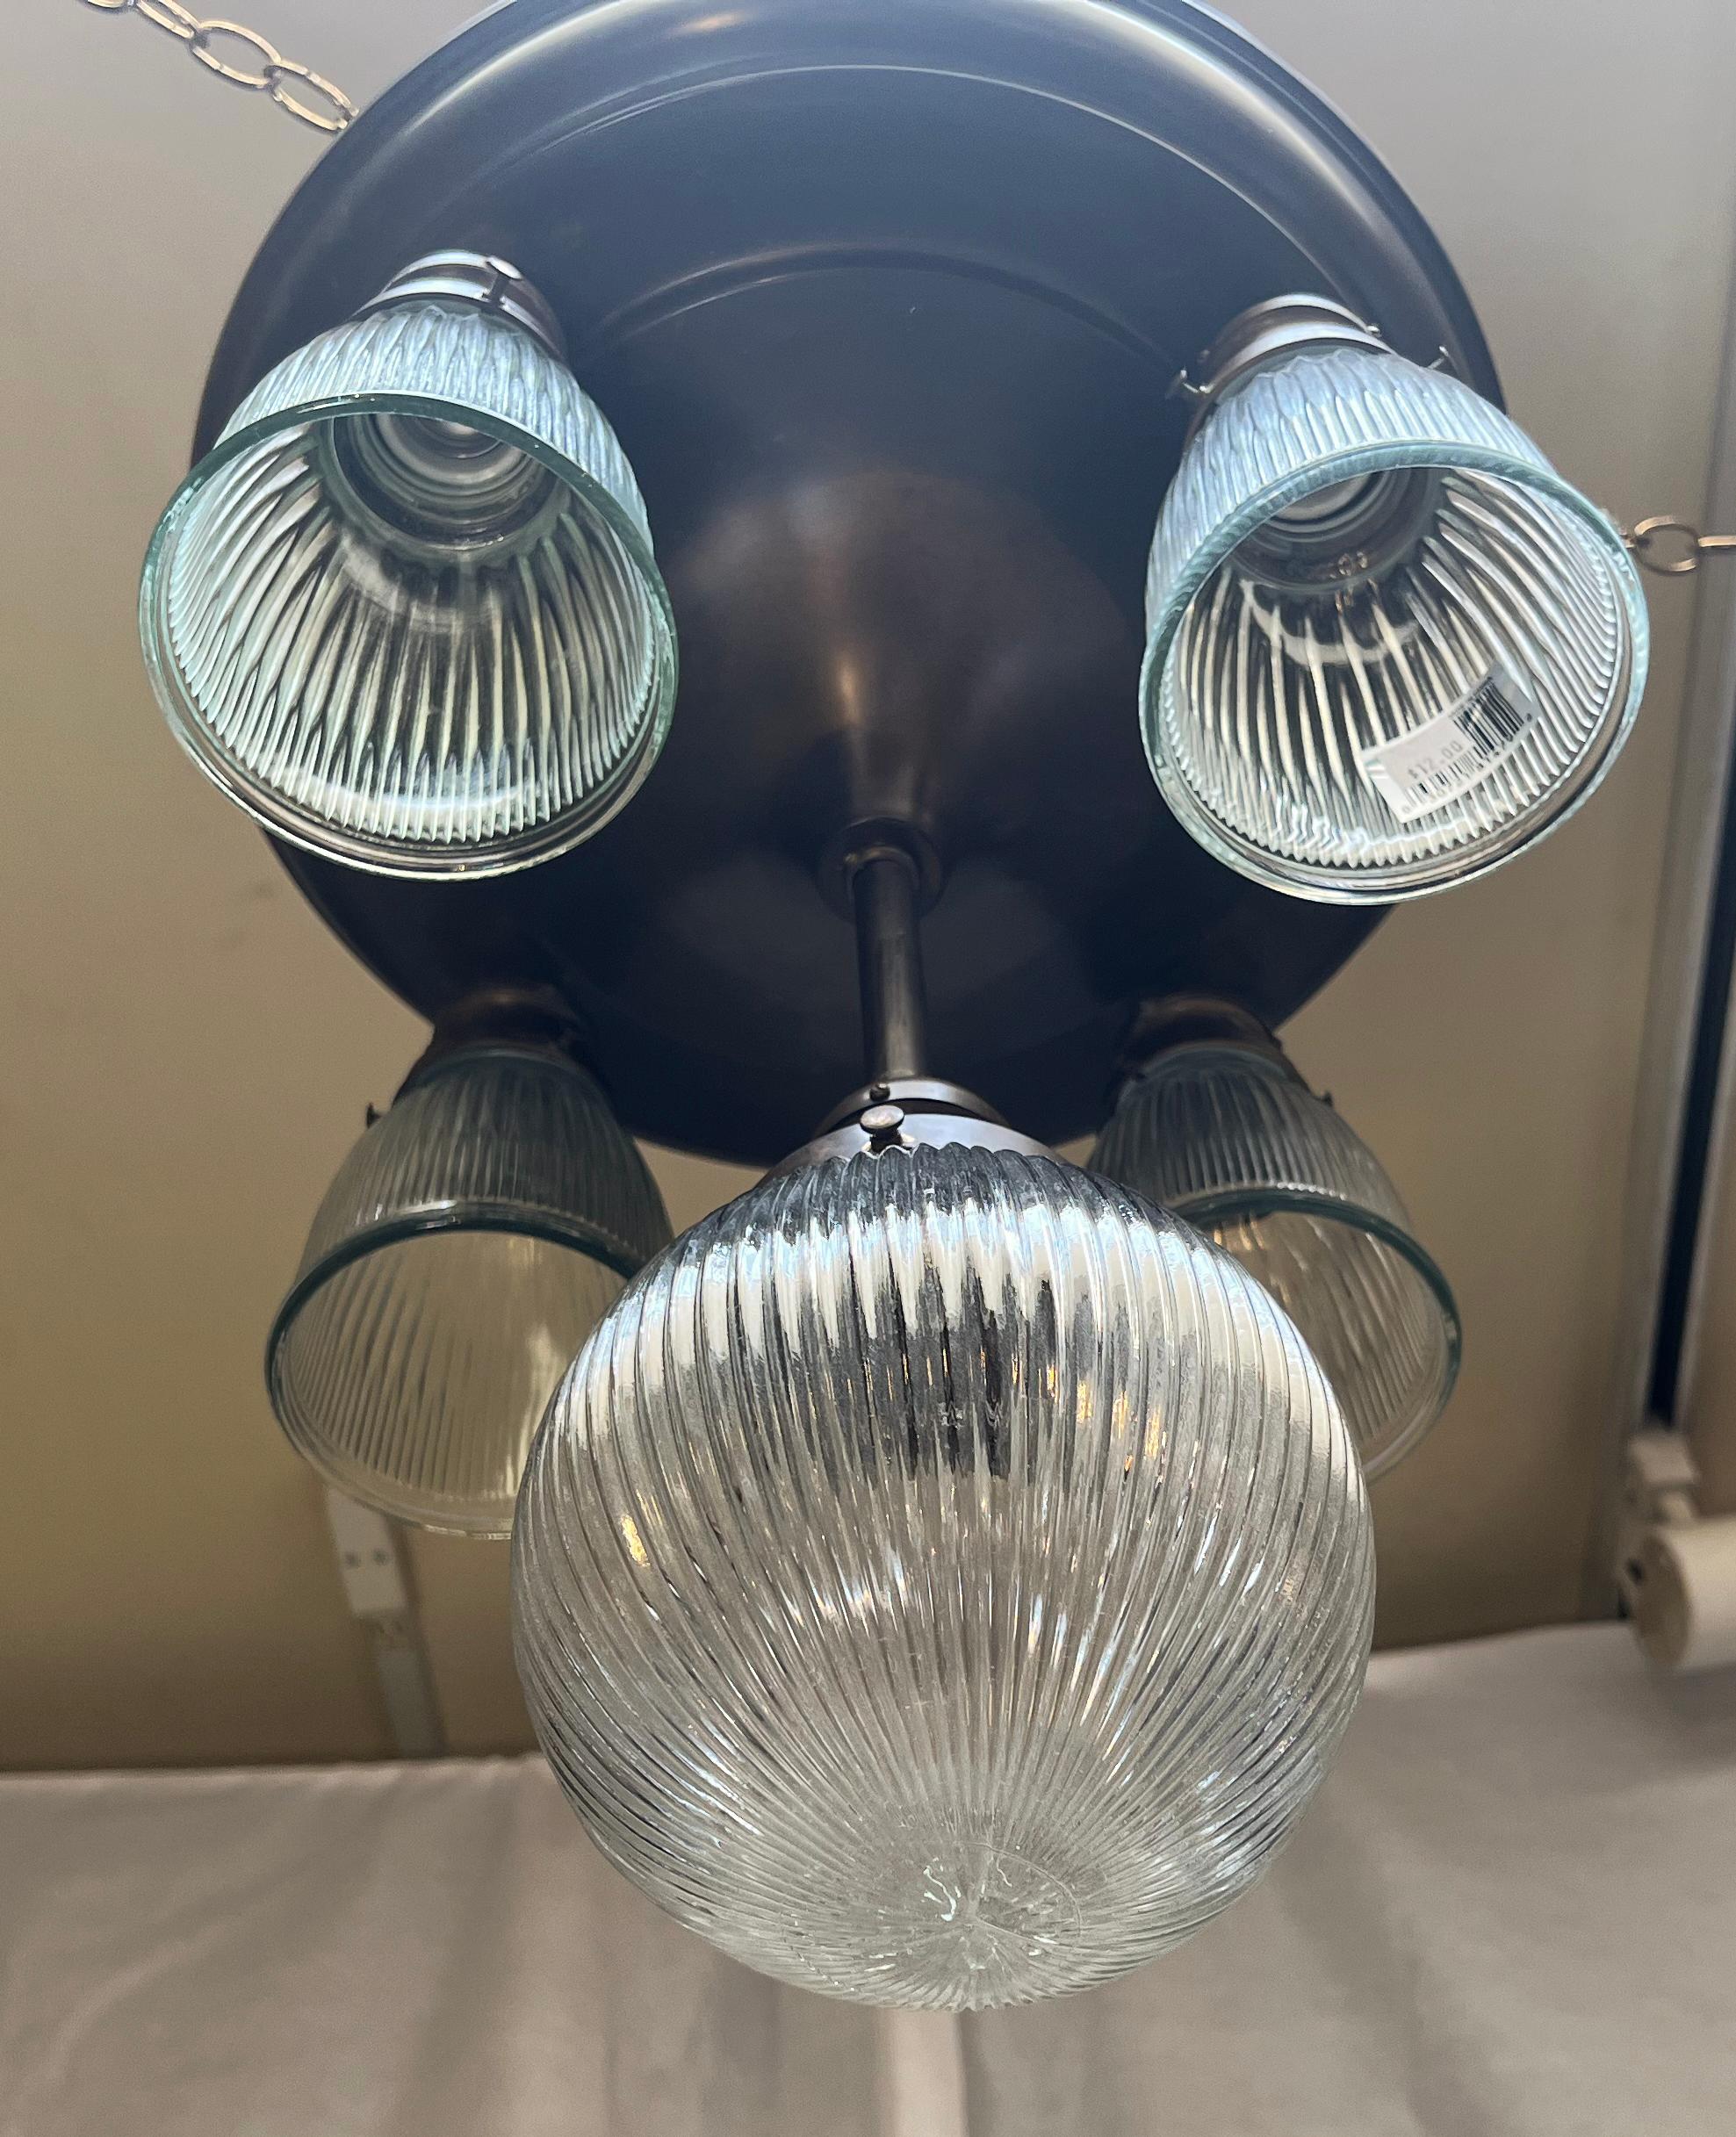 Rewired Vintage Ceiling Pan Light, circa 1930 In Good Condition For Sale In Berkeley, CA